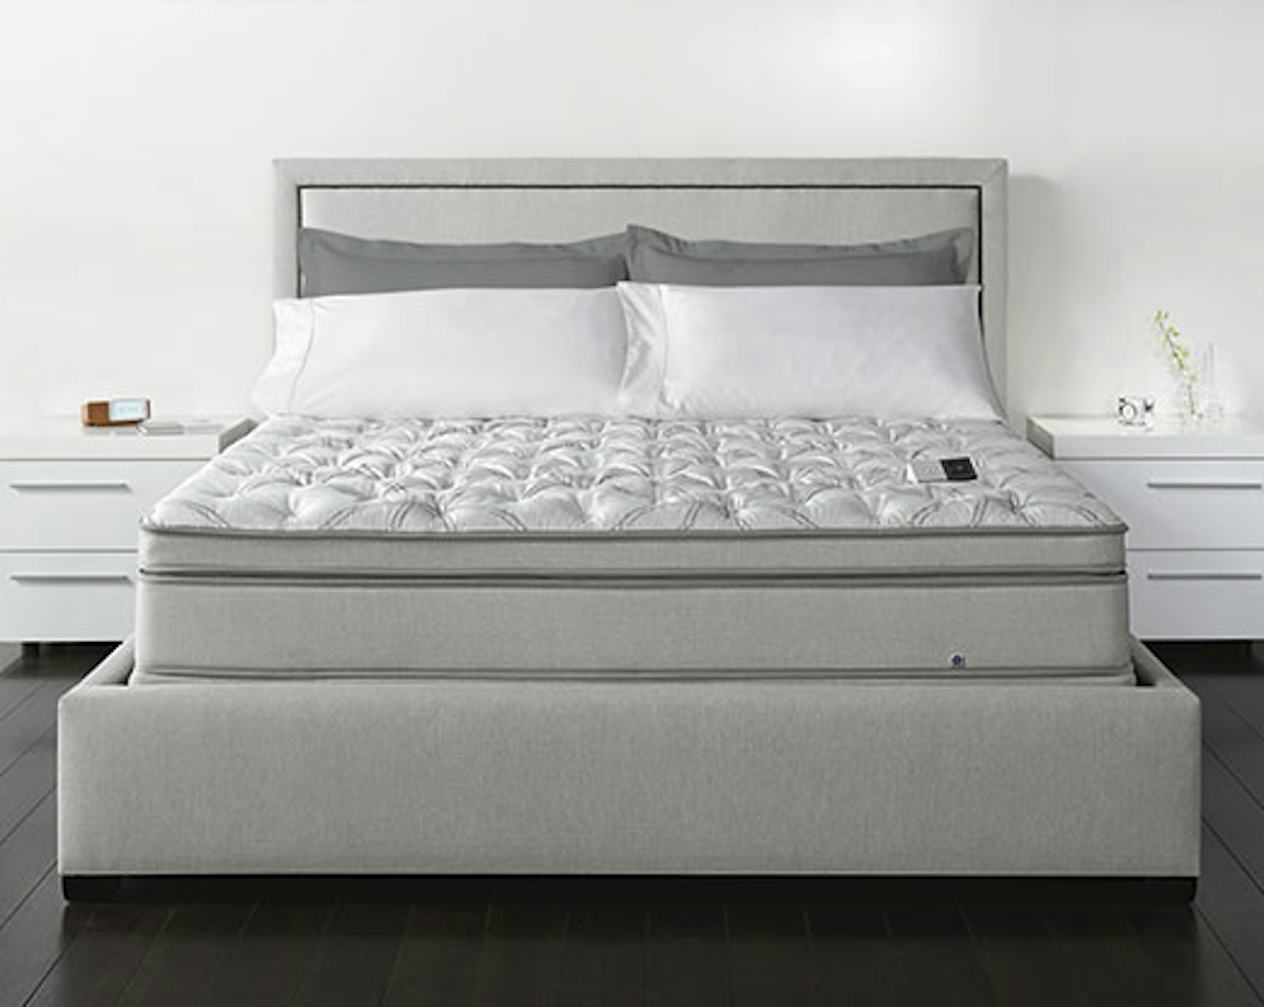 reviews and ratings of mattresses